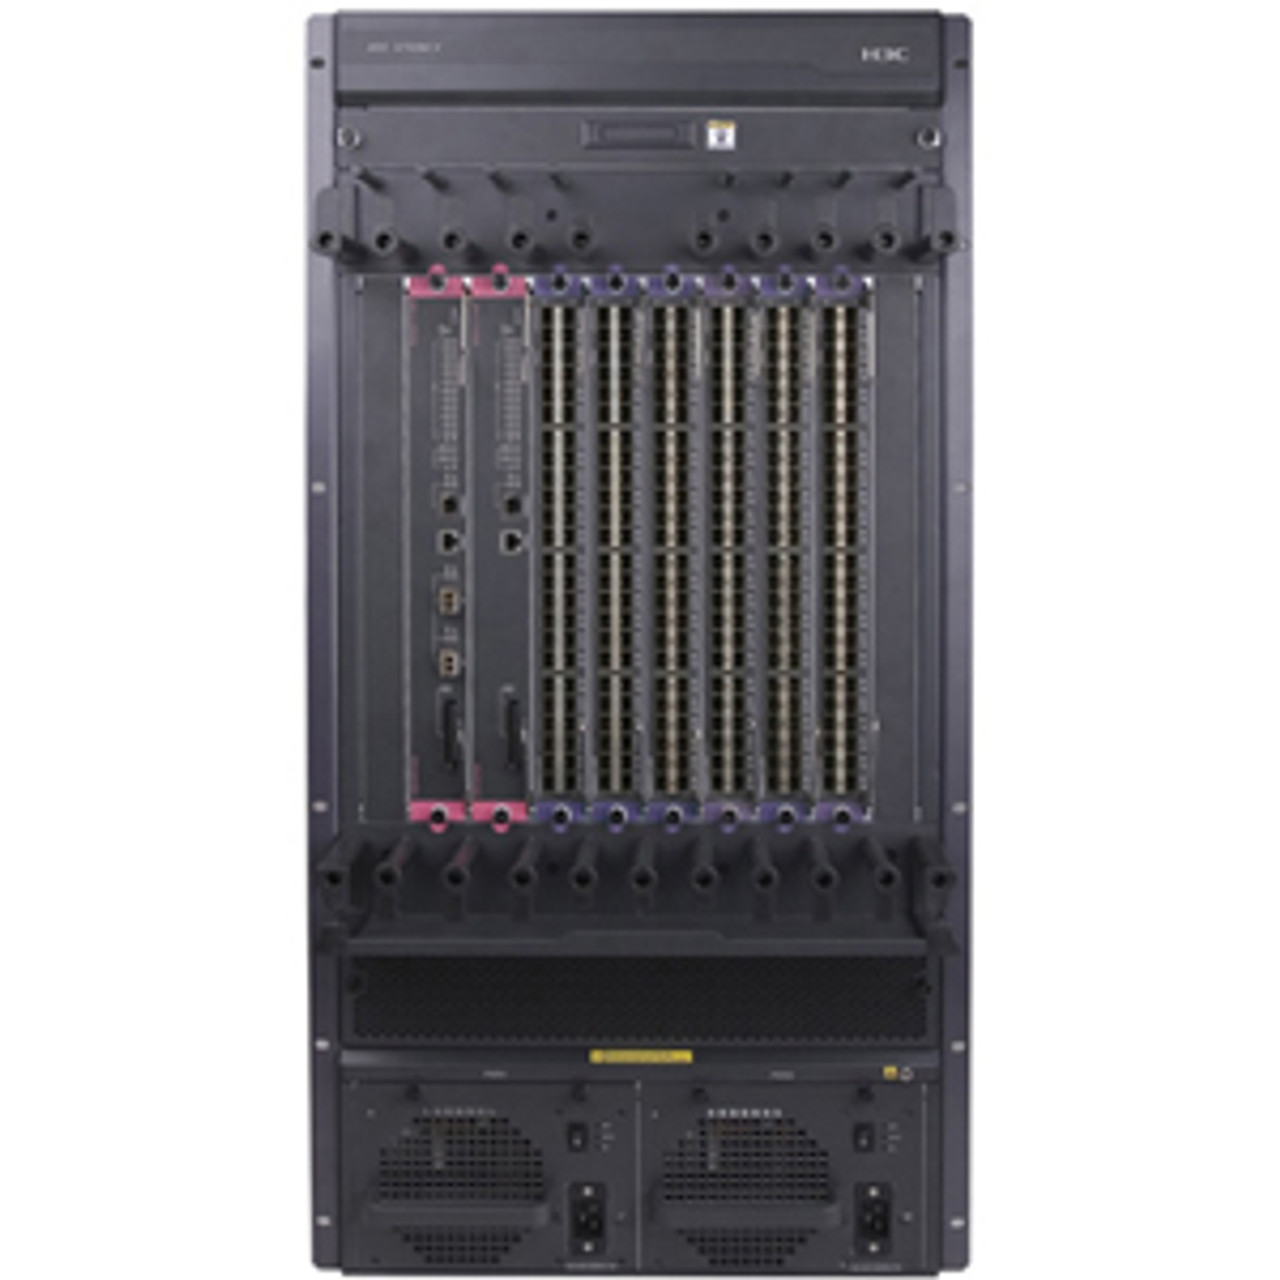 JD241B HP A7506 Vertical Switch Chassis (Refurbished)